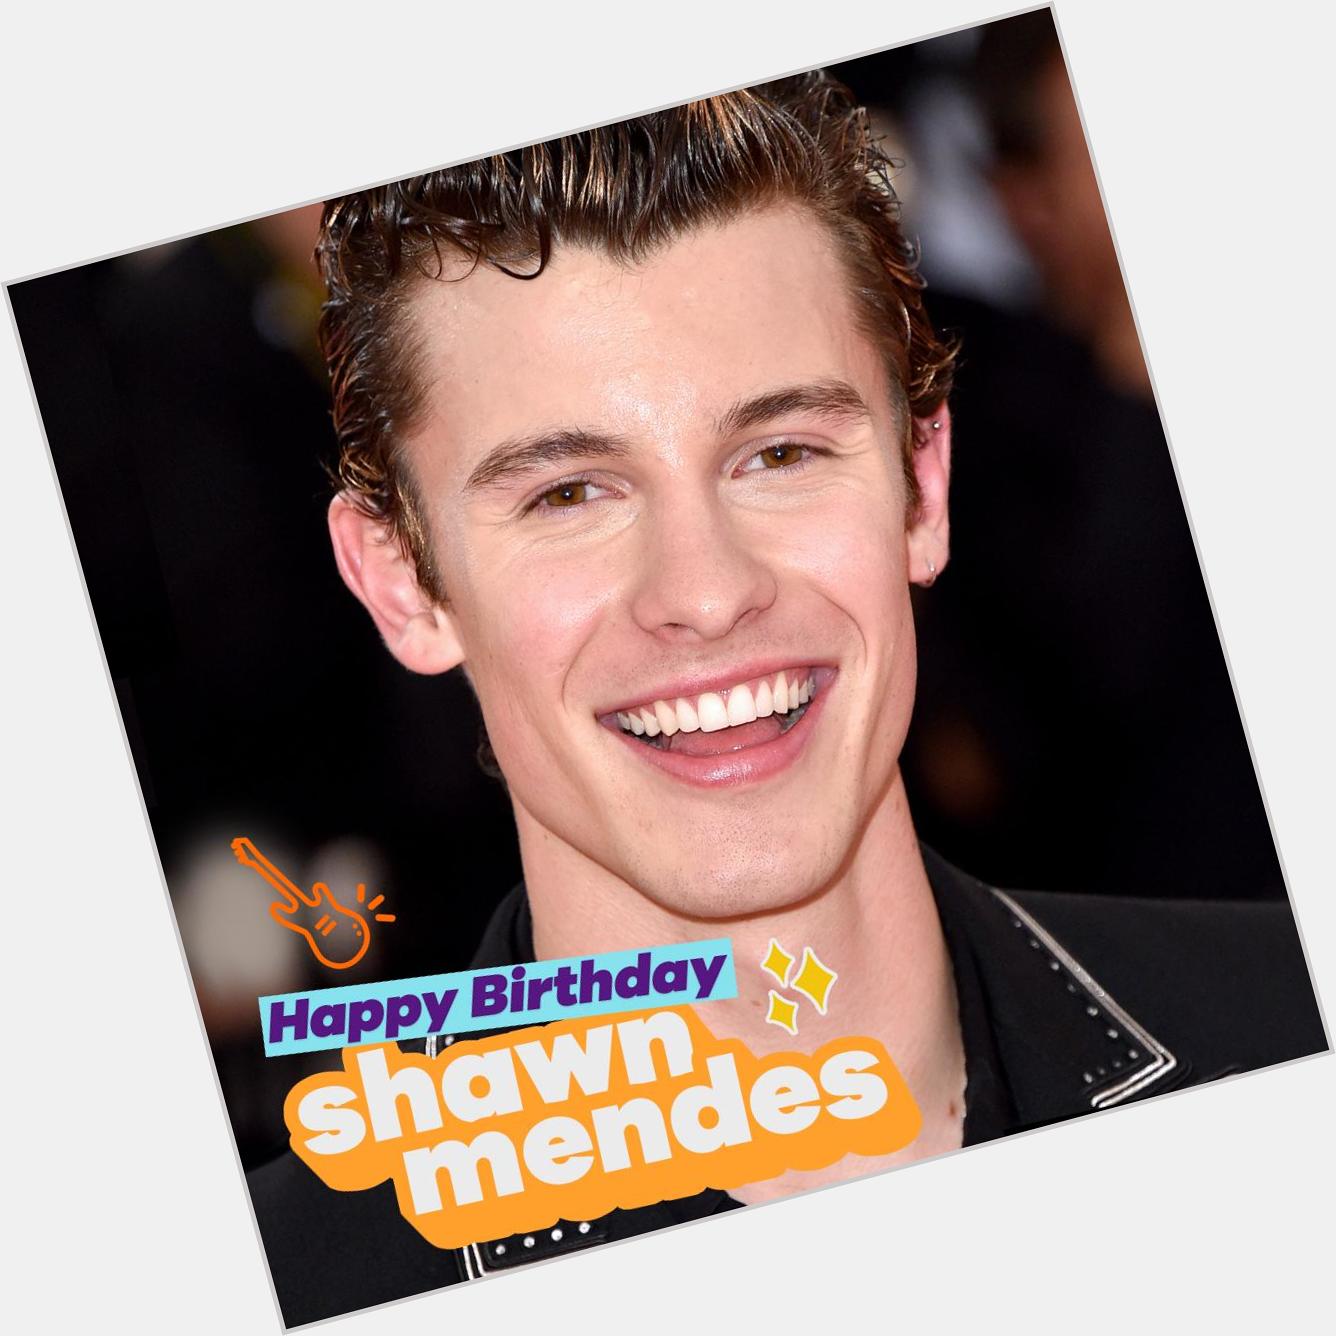 Happy birthday to the beautiful face that is Shawn Mendes 